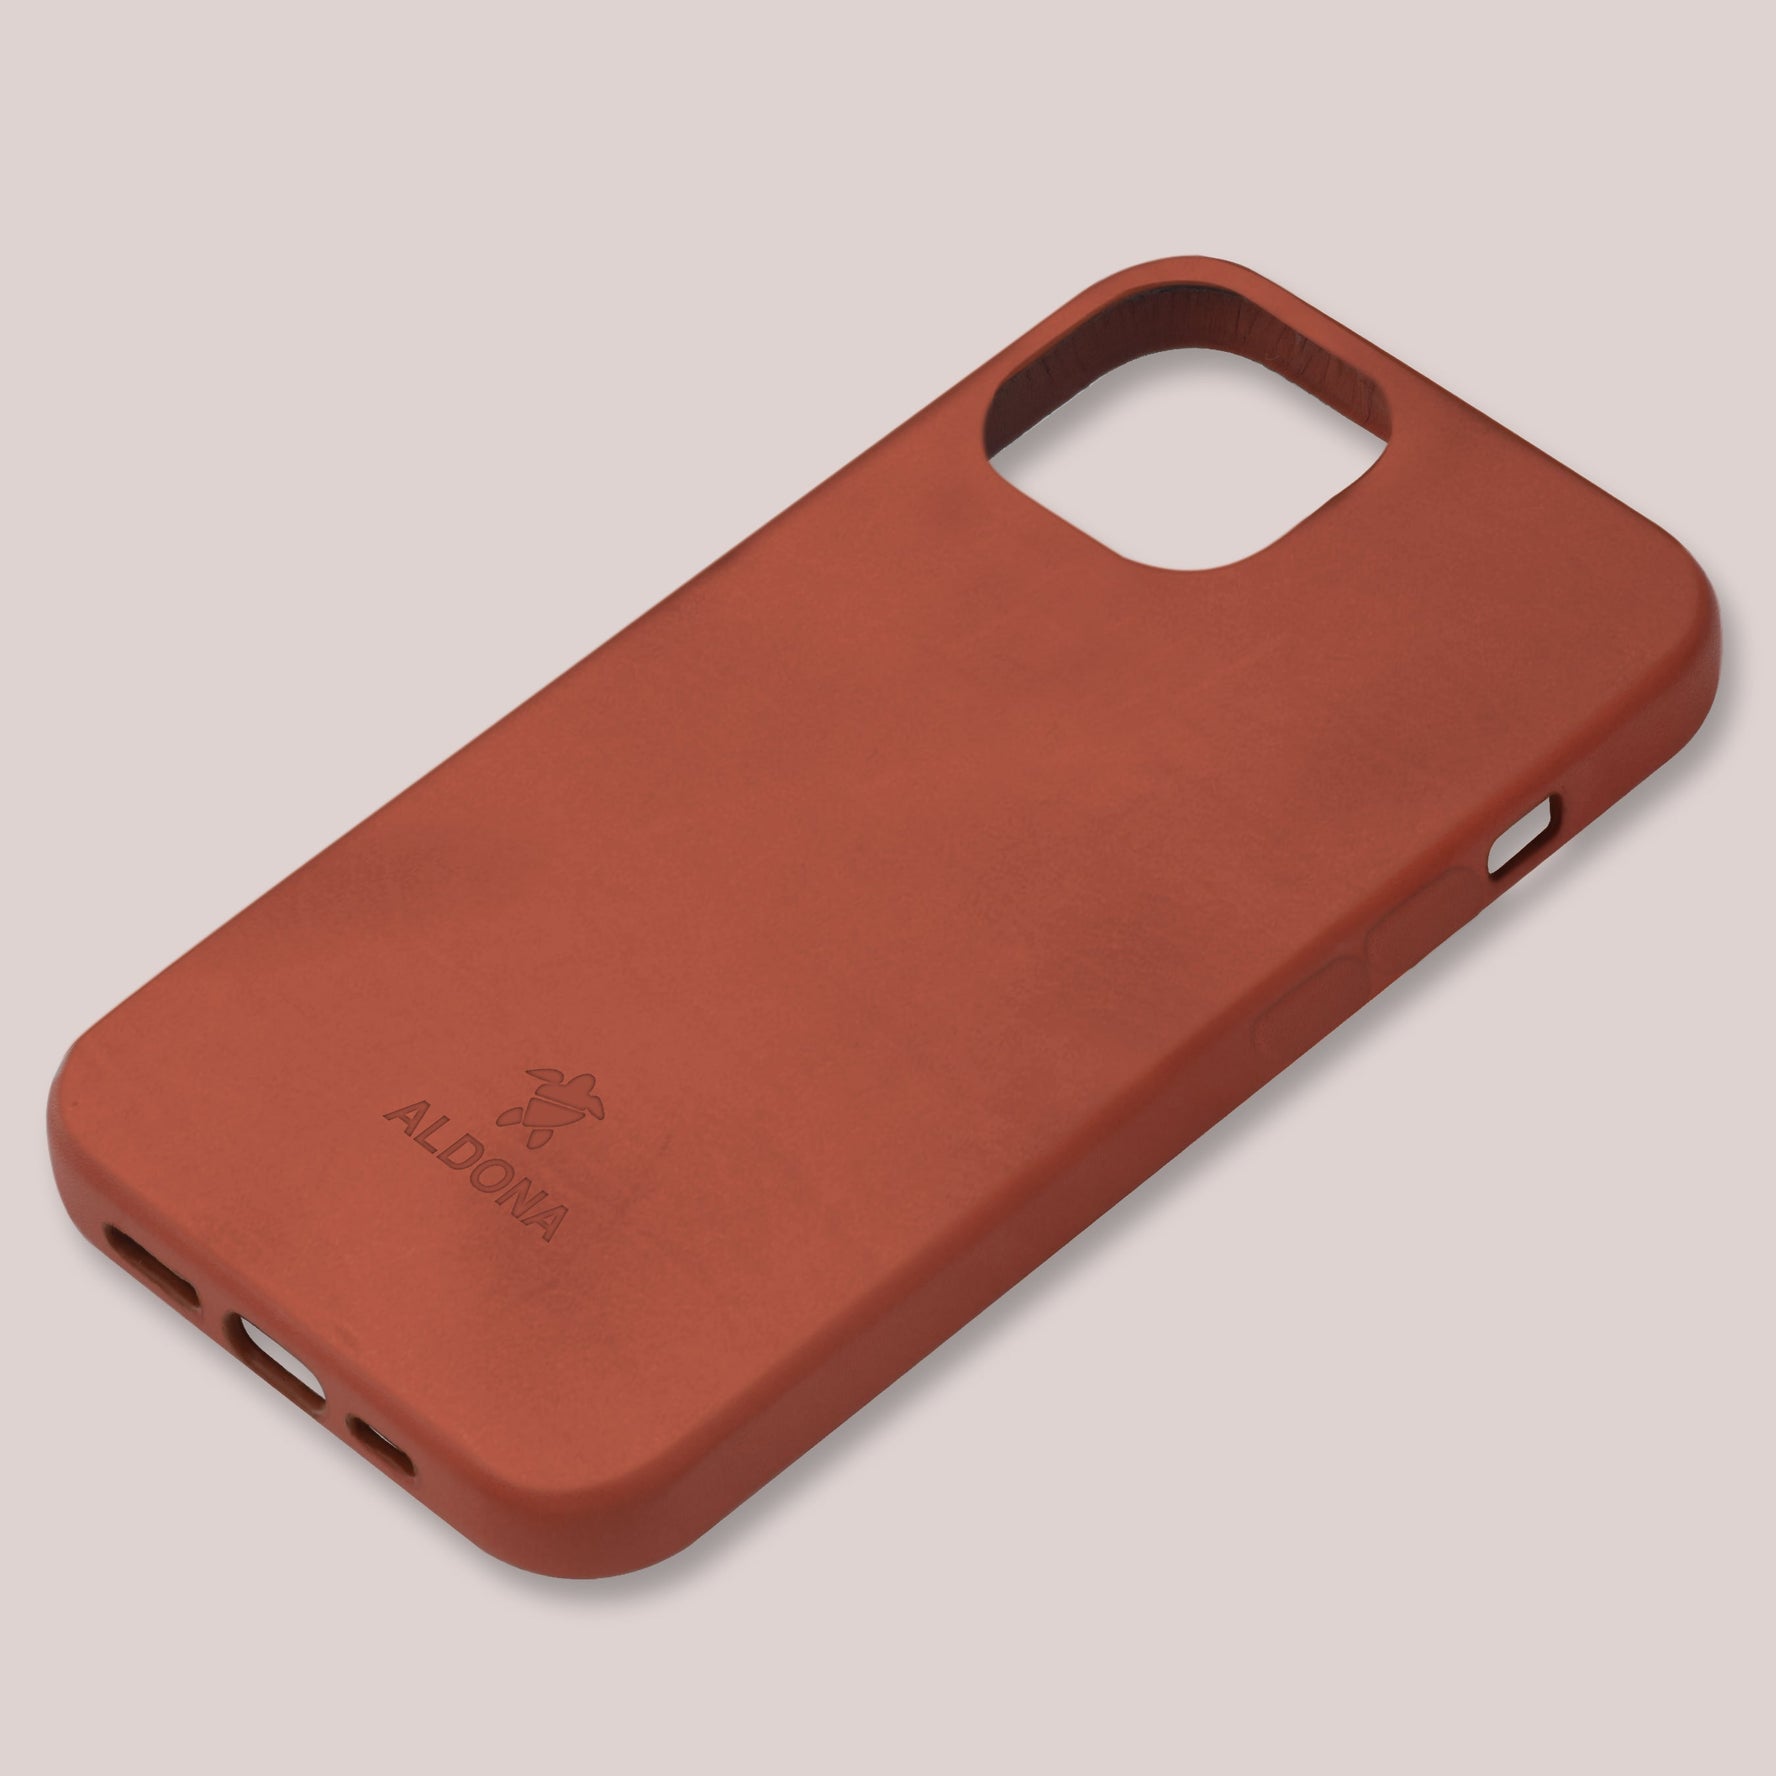 Kalon Case for iPhone 13 series with MagSafe Compatibility - Cognac